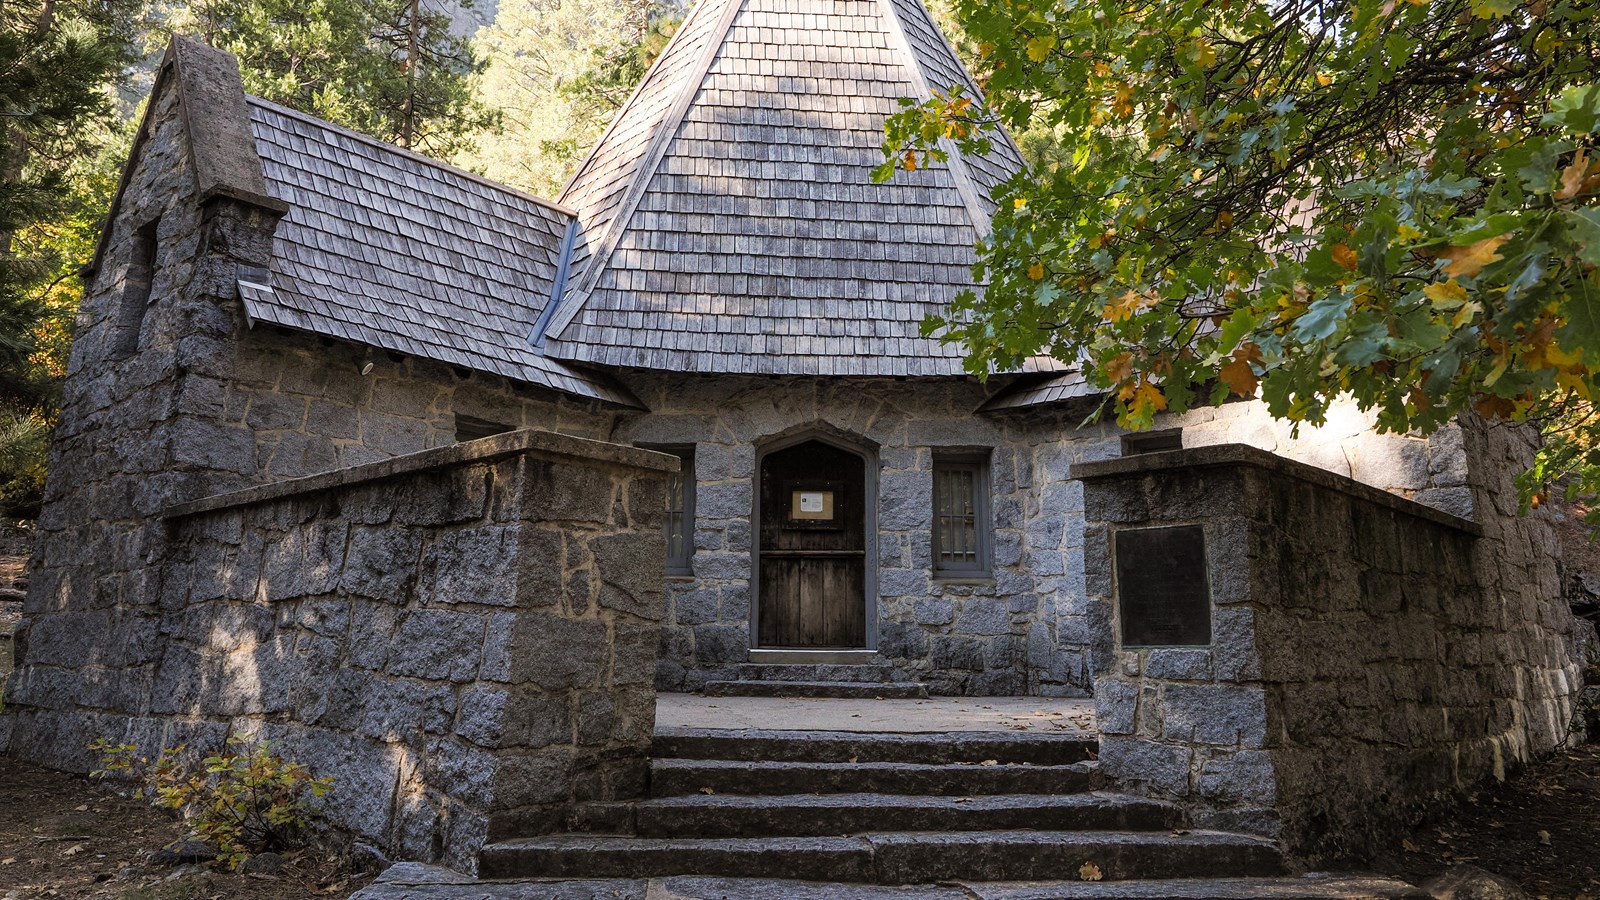 A rustic stone building with a central peak and gabled roofs on either side